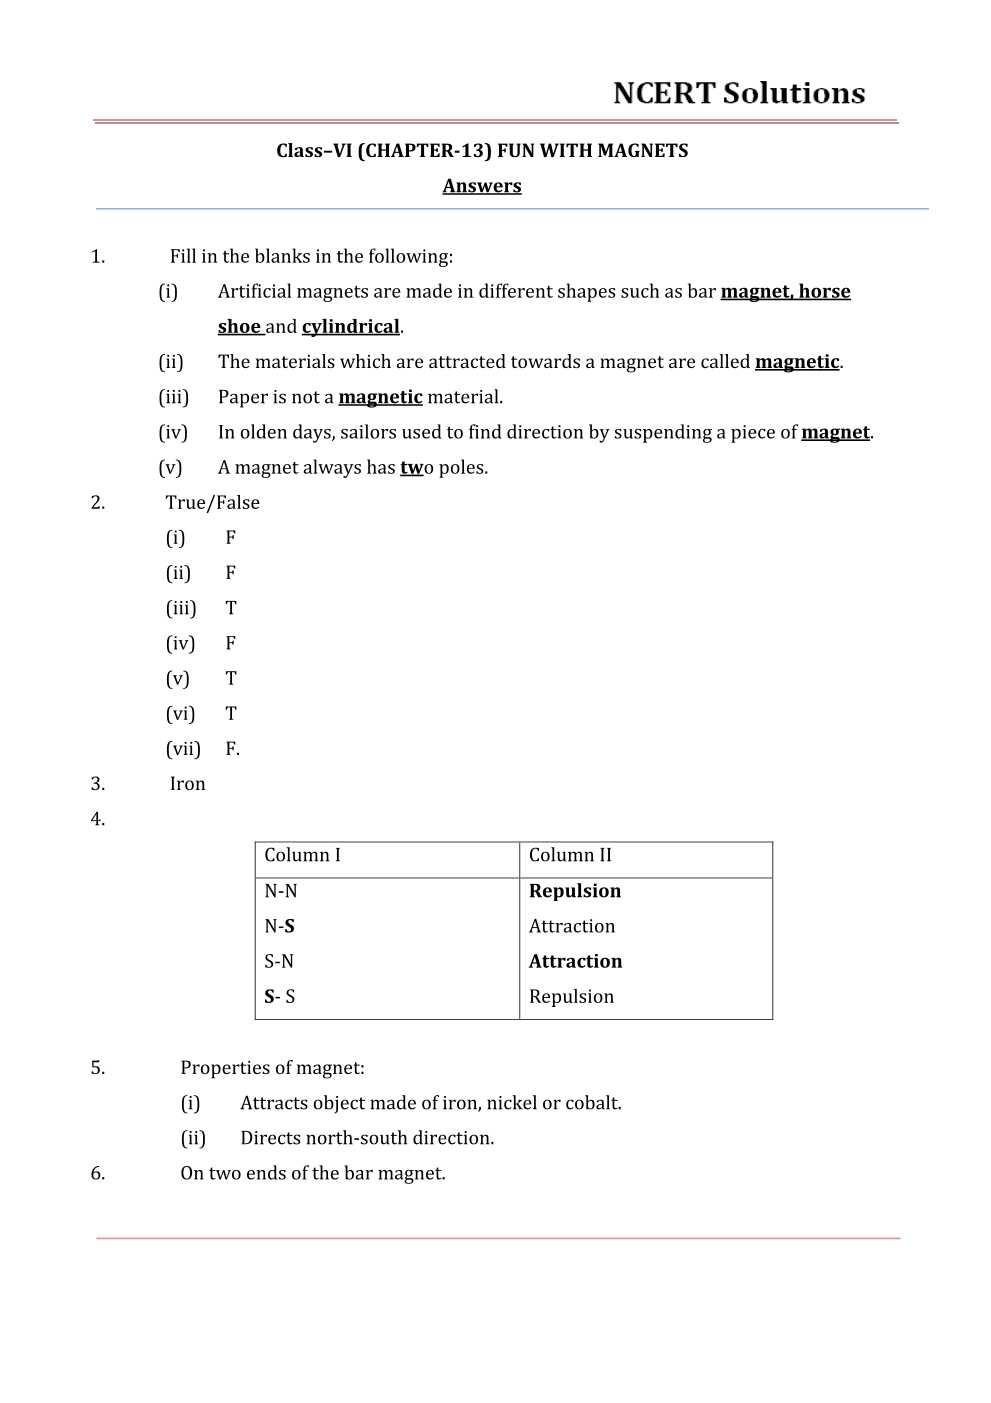 NCERT Solutions For Class 6 Science Chapter 13